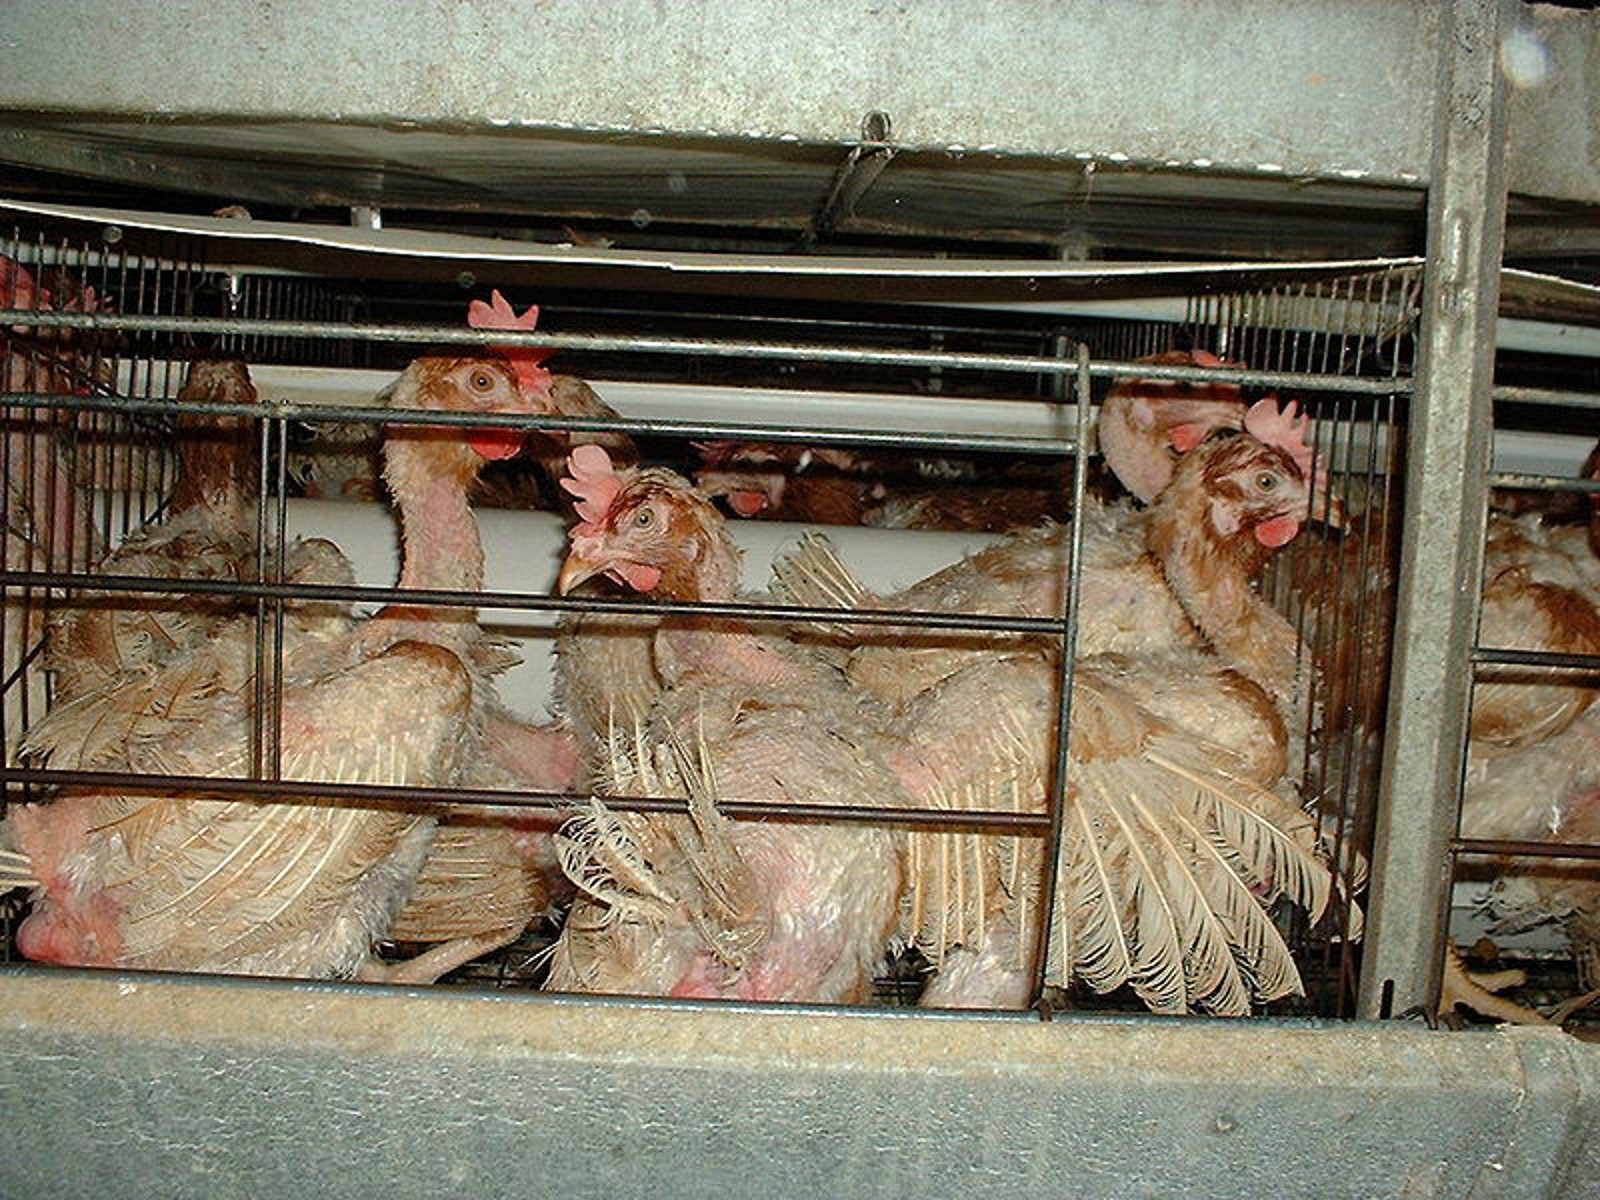 10 Alarming Facts about the Lives of Factory Farmed Animals